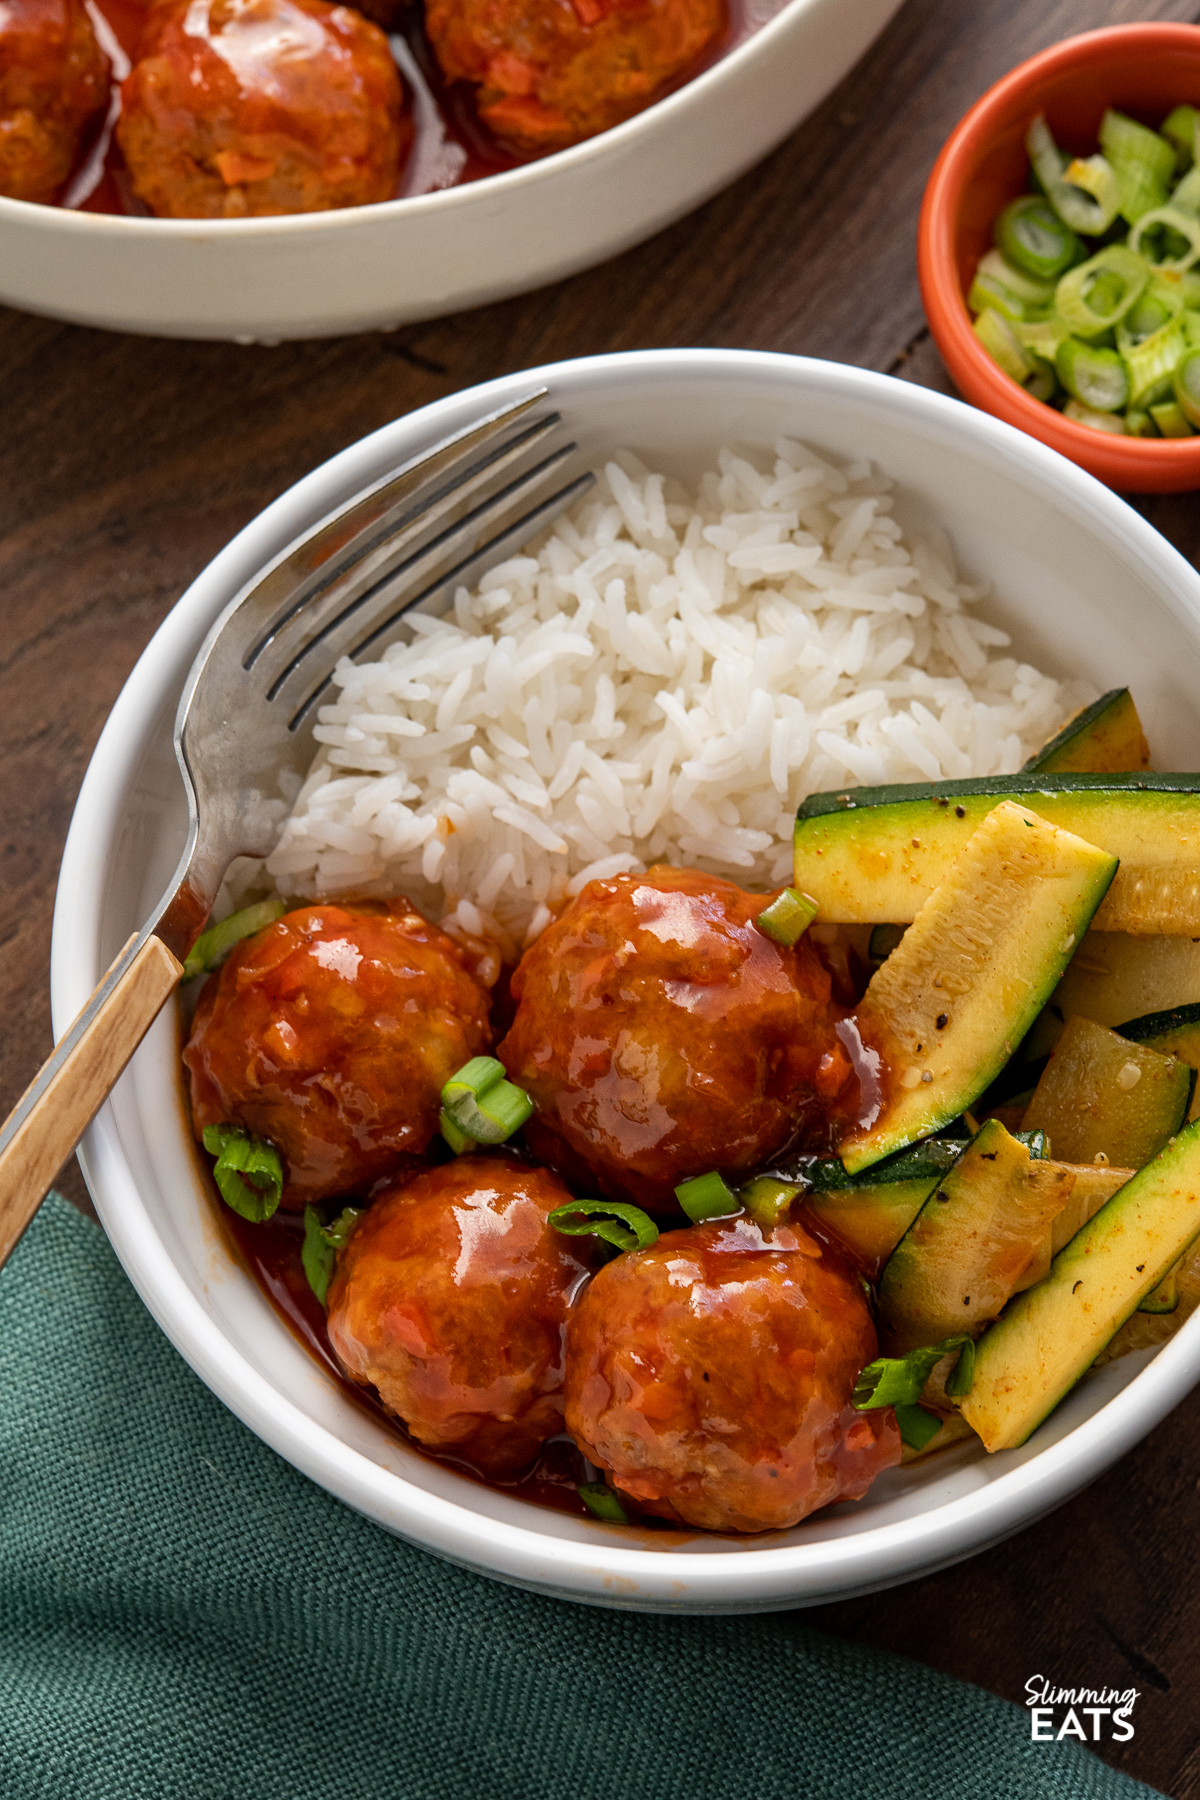 buffalo chicken meatballs in white bowl with rice and sauteed zucchini, bowl of meatballs and small orange bowl of chopped green onions in background